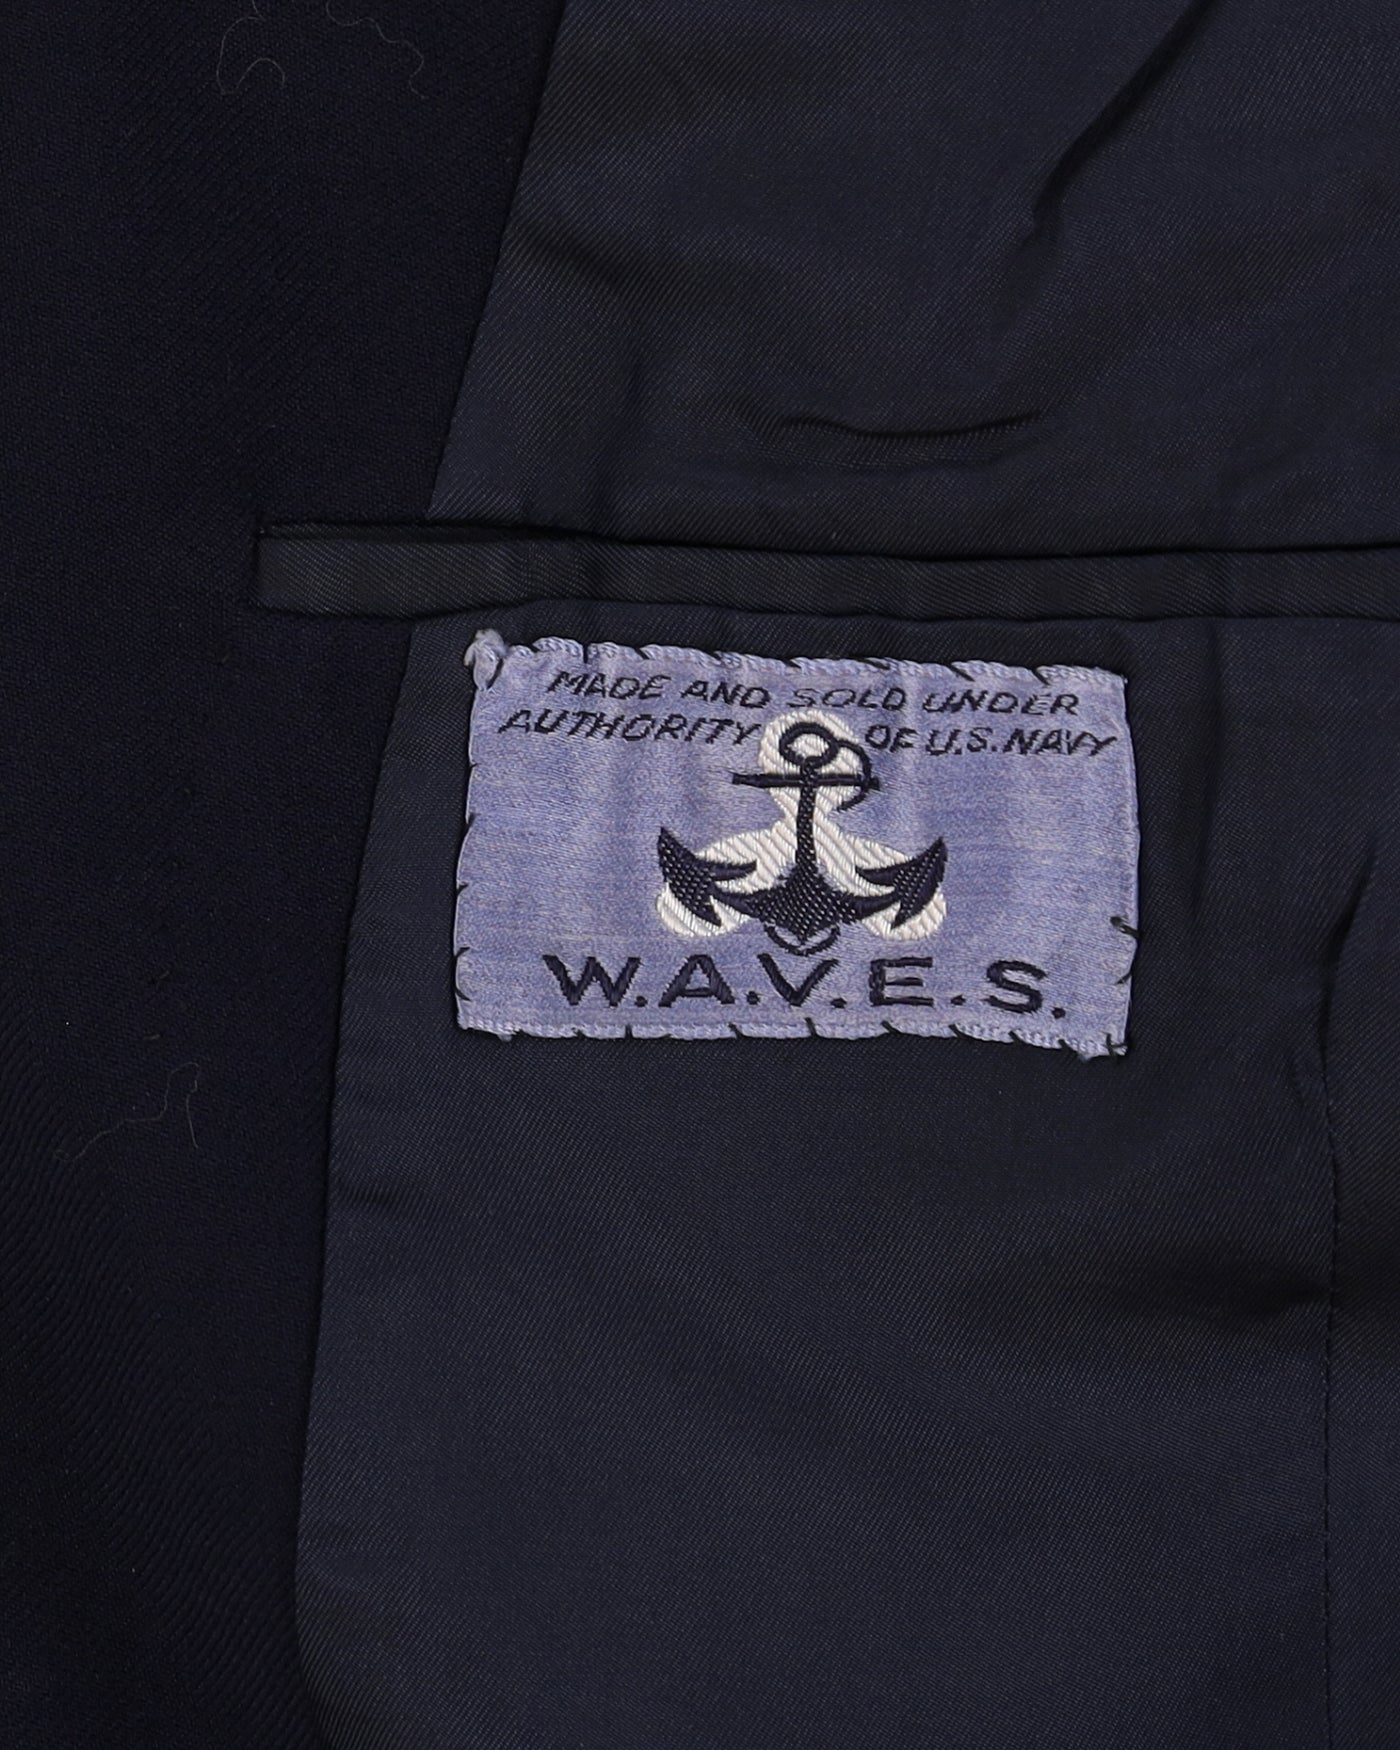 Rare 1940s WW2 Vintage US Navy W.A.V.E.S Women's Volunteer Services Dress Jacket - Small